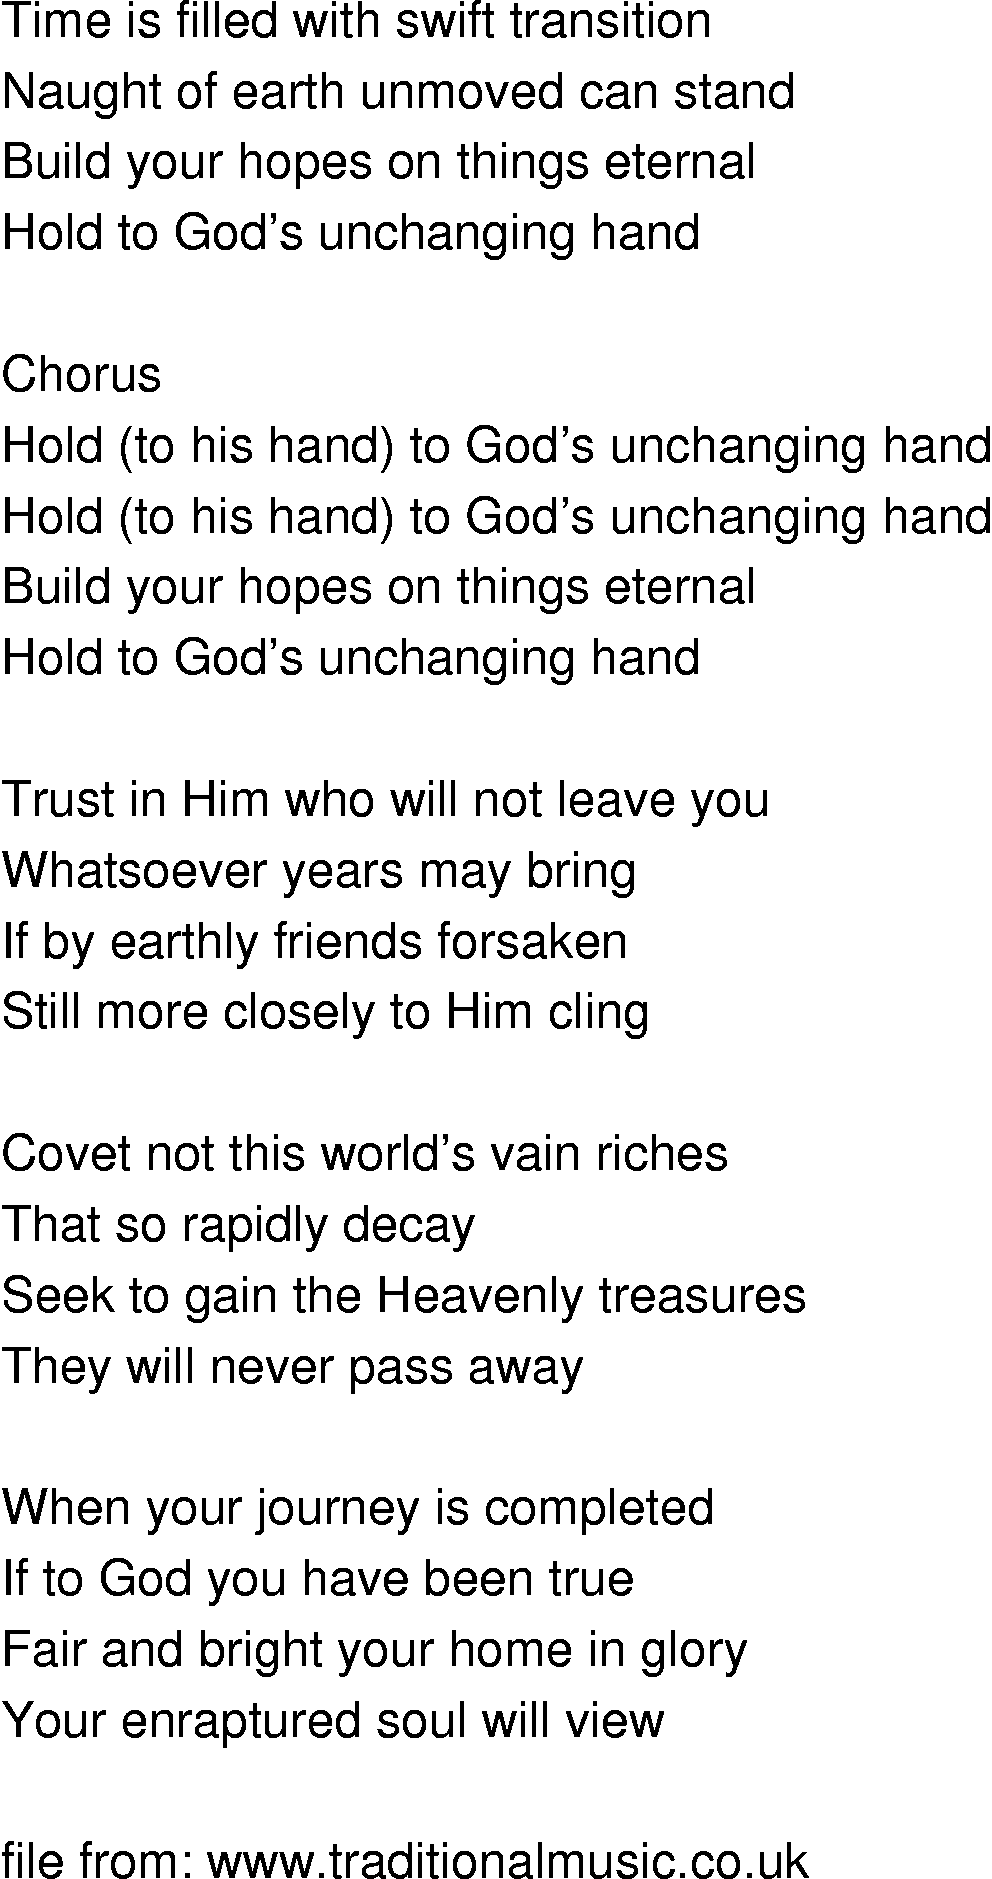 Old-Time (oldtimey) Song Lyrics - hold to gods unchanging hand